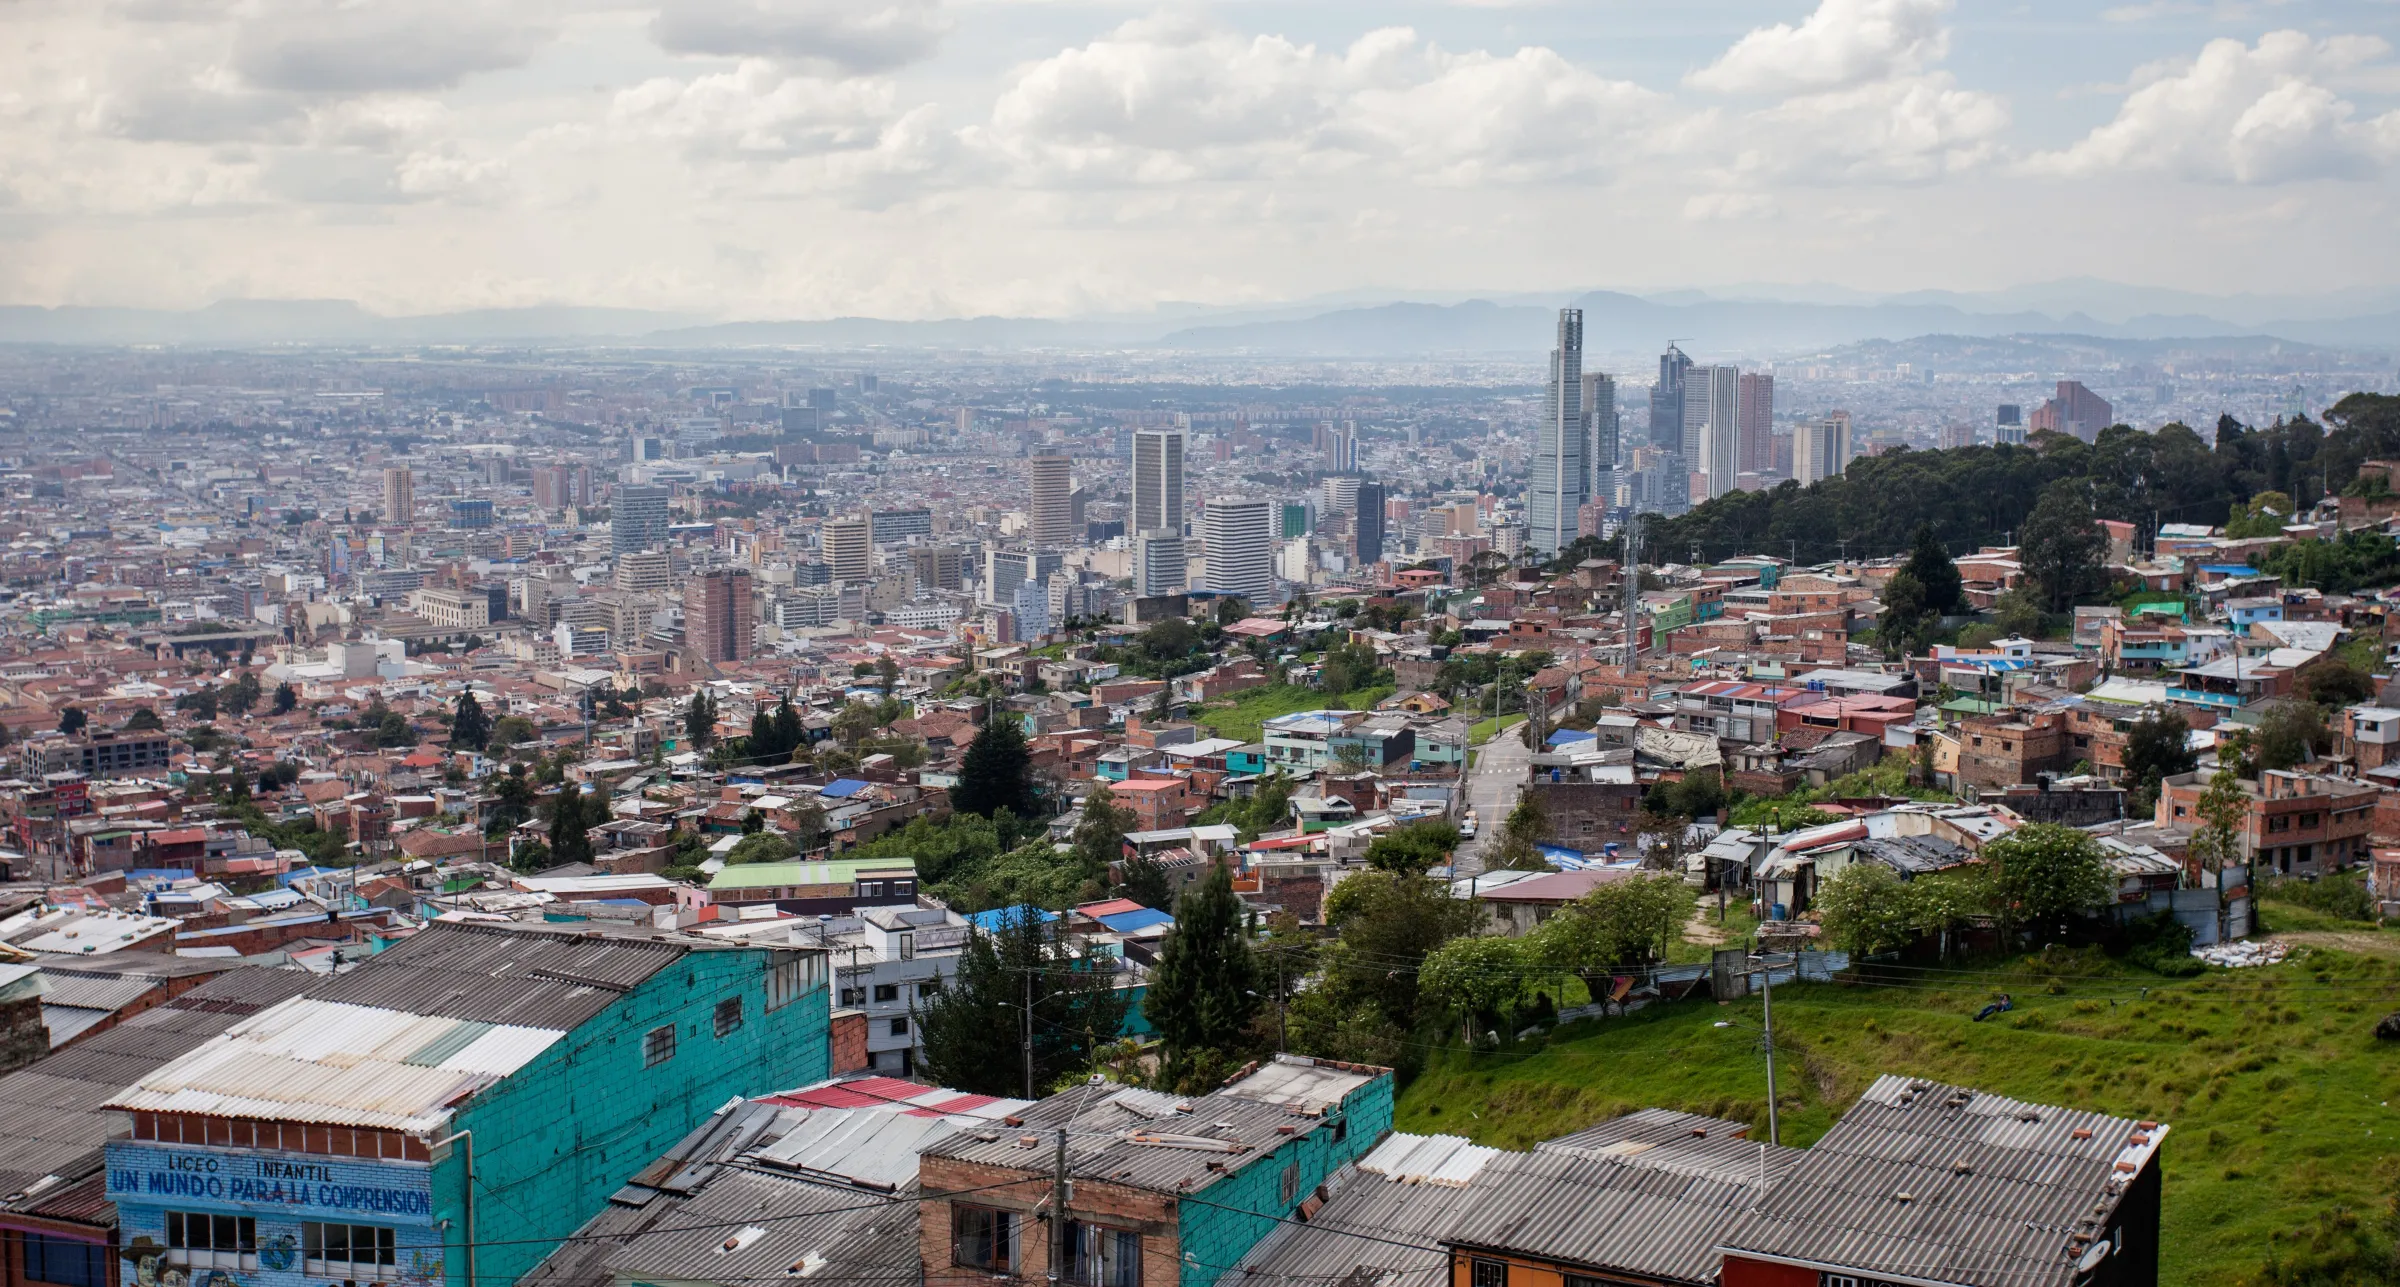 A view of Colombia’s capital city of Bogota from community organiser Veronica Fonseca’s hillside neighbourhood in the eastern part of the city, April 23, 2021. Thomson Reuters Foundation/Fabio Cuttica